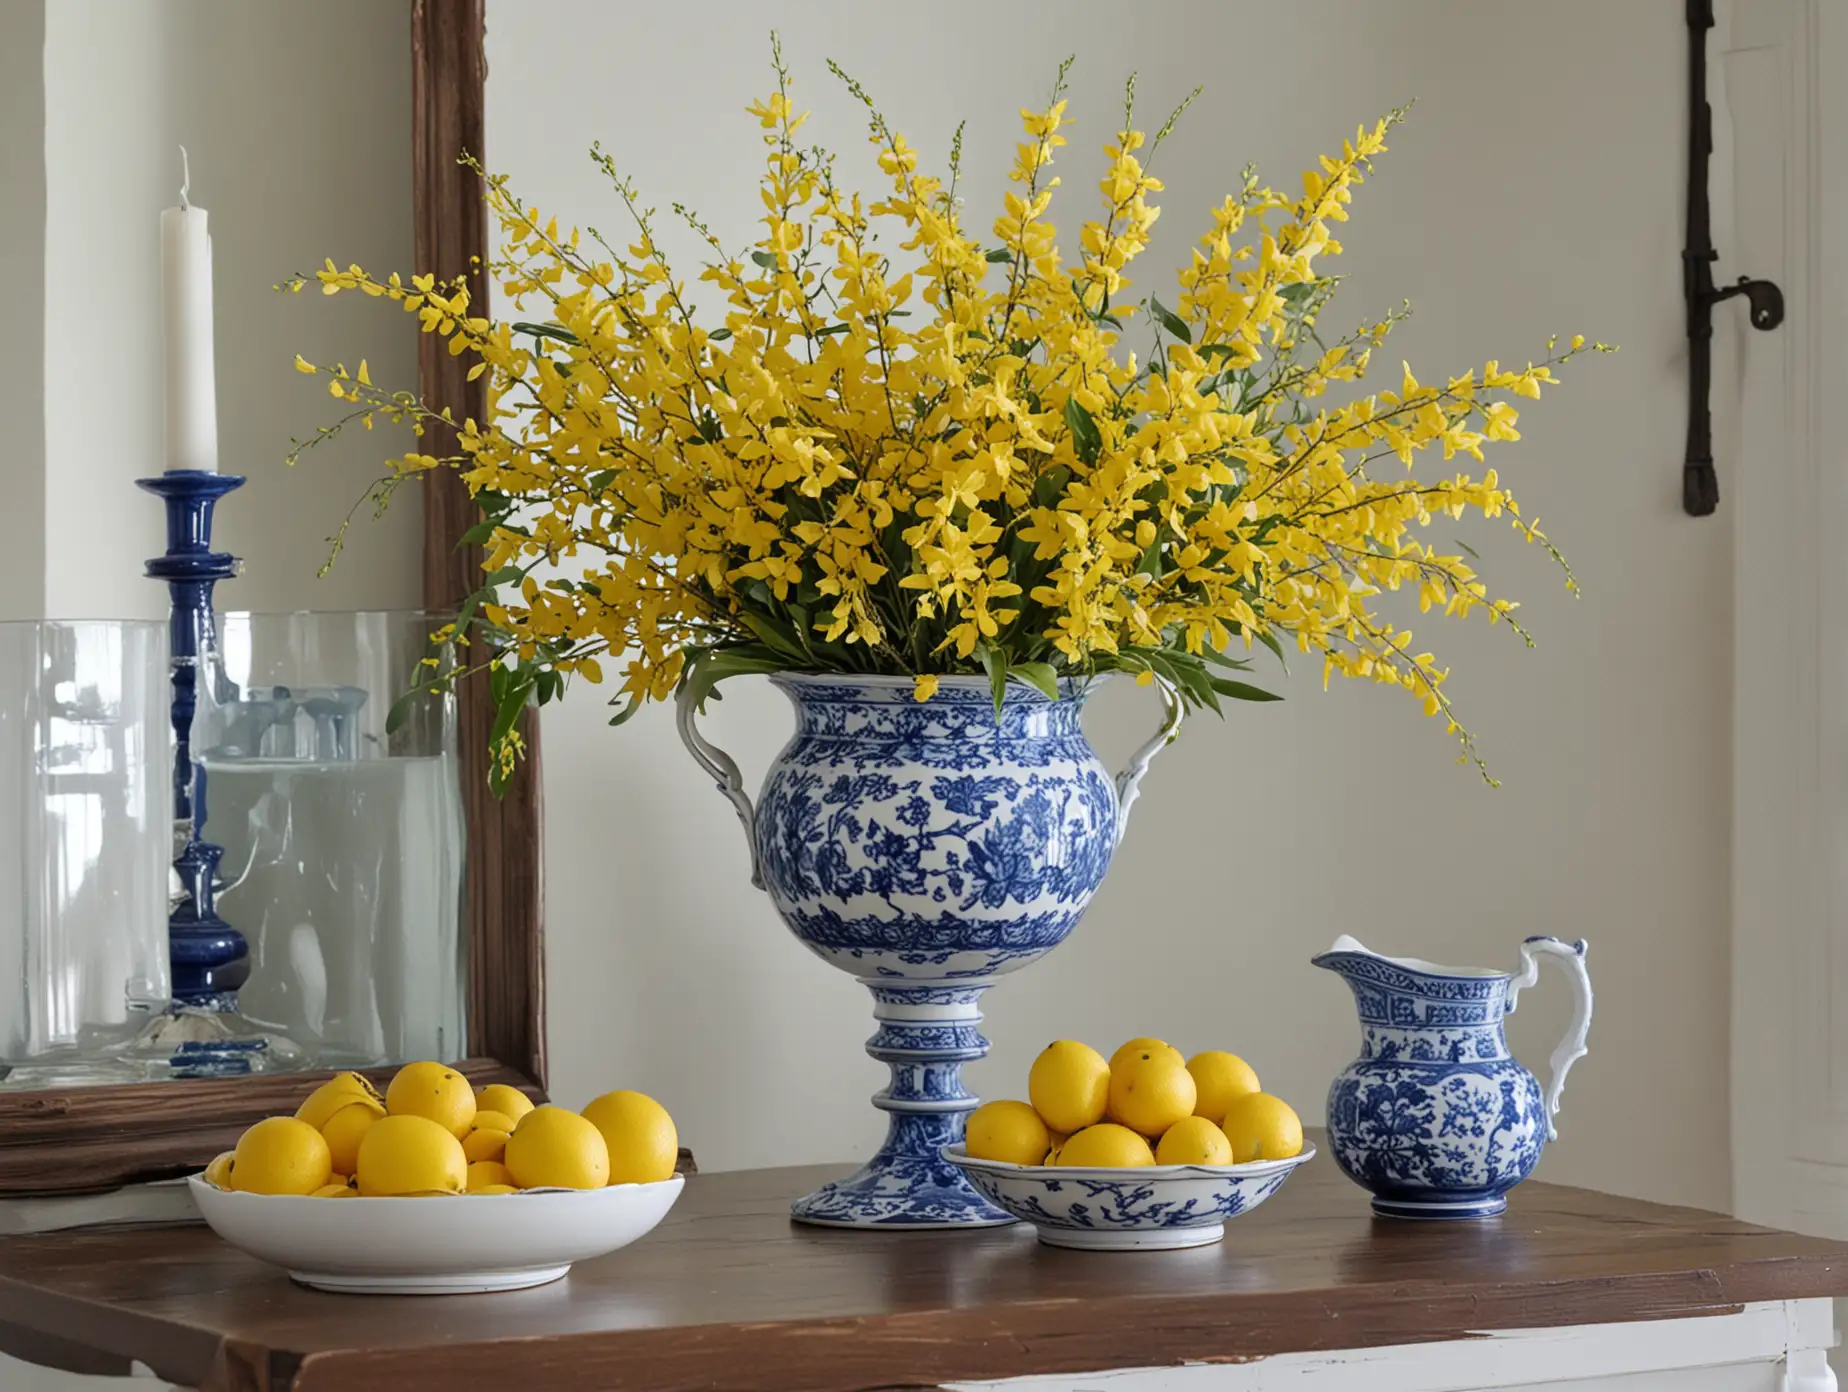 FRUIT IN A FOOTED BLUE AND WHITE COMPOTE WITH A PEDESTAL, WITH ONE BOQUET OF FORSYTHIA BRANCHES IN A BLUE AND WHITE PITCHER